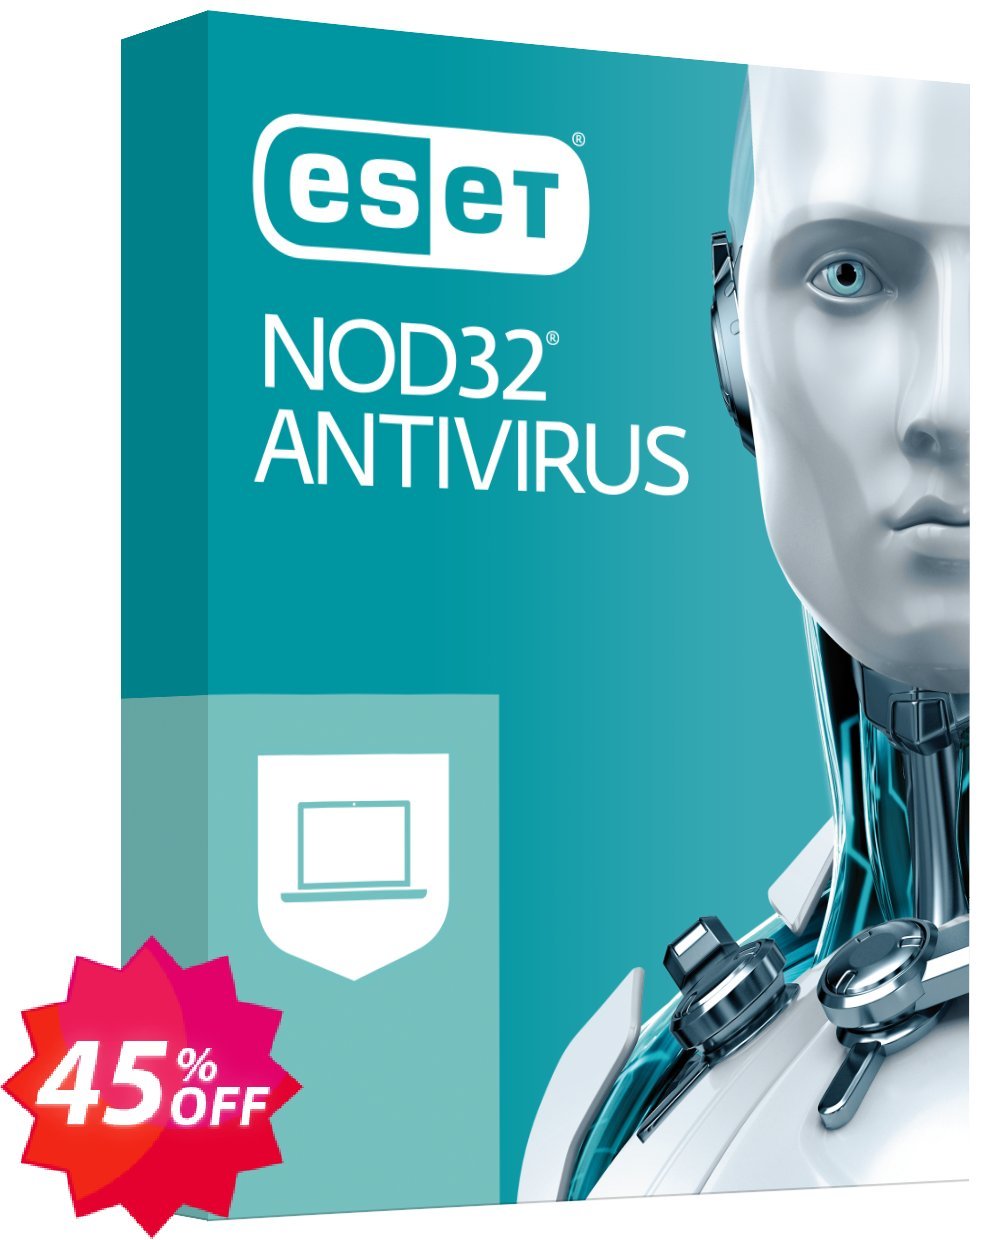 ESET NOD32 Antivirus -  Yearly 5 Devices Coupon code 45% discount 